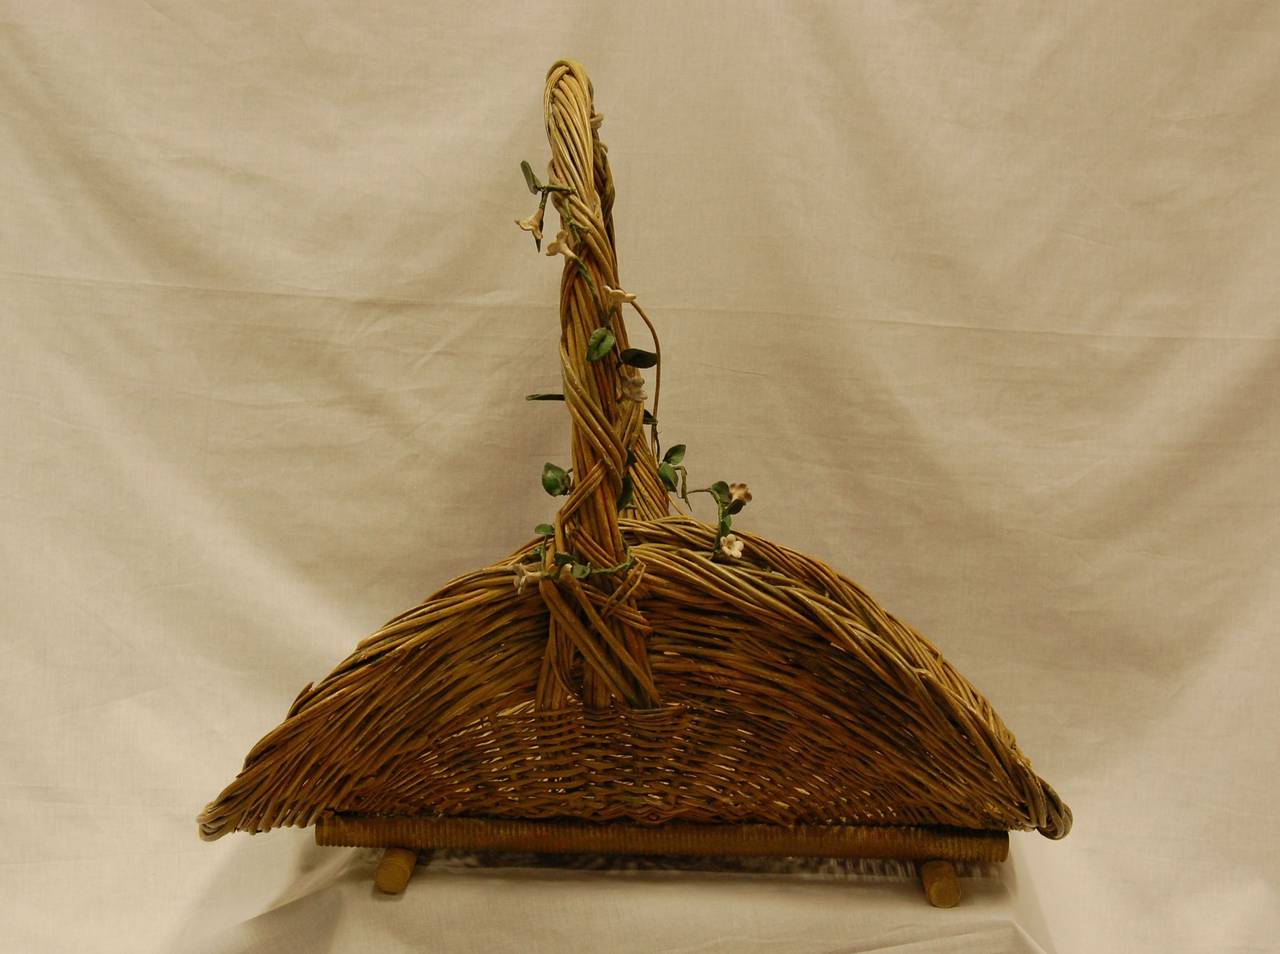 Exceptionally large rattan basket with handle, interwoven with wire, porcelain flowers and leaves. In original finish.